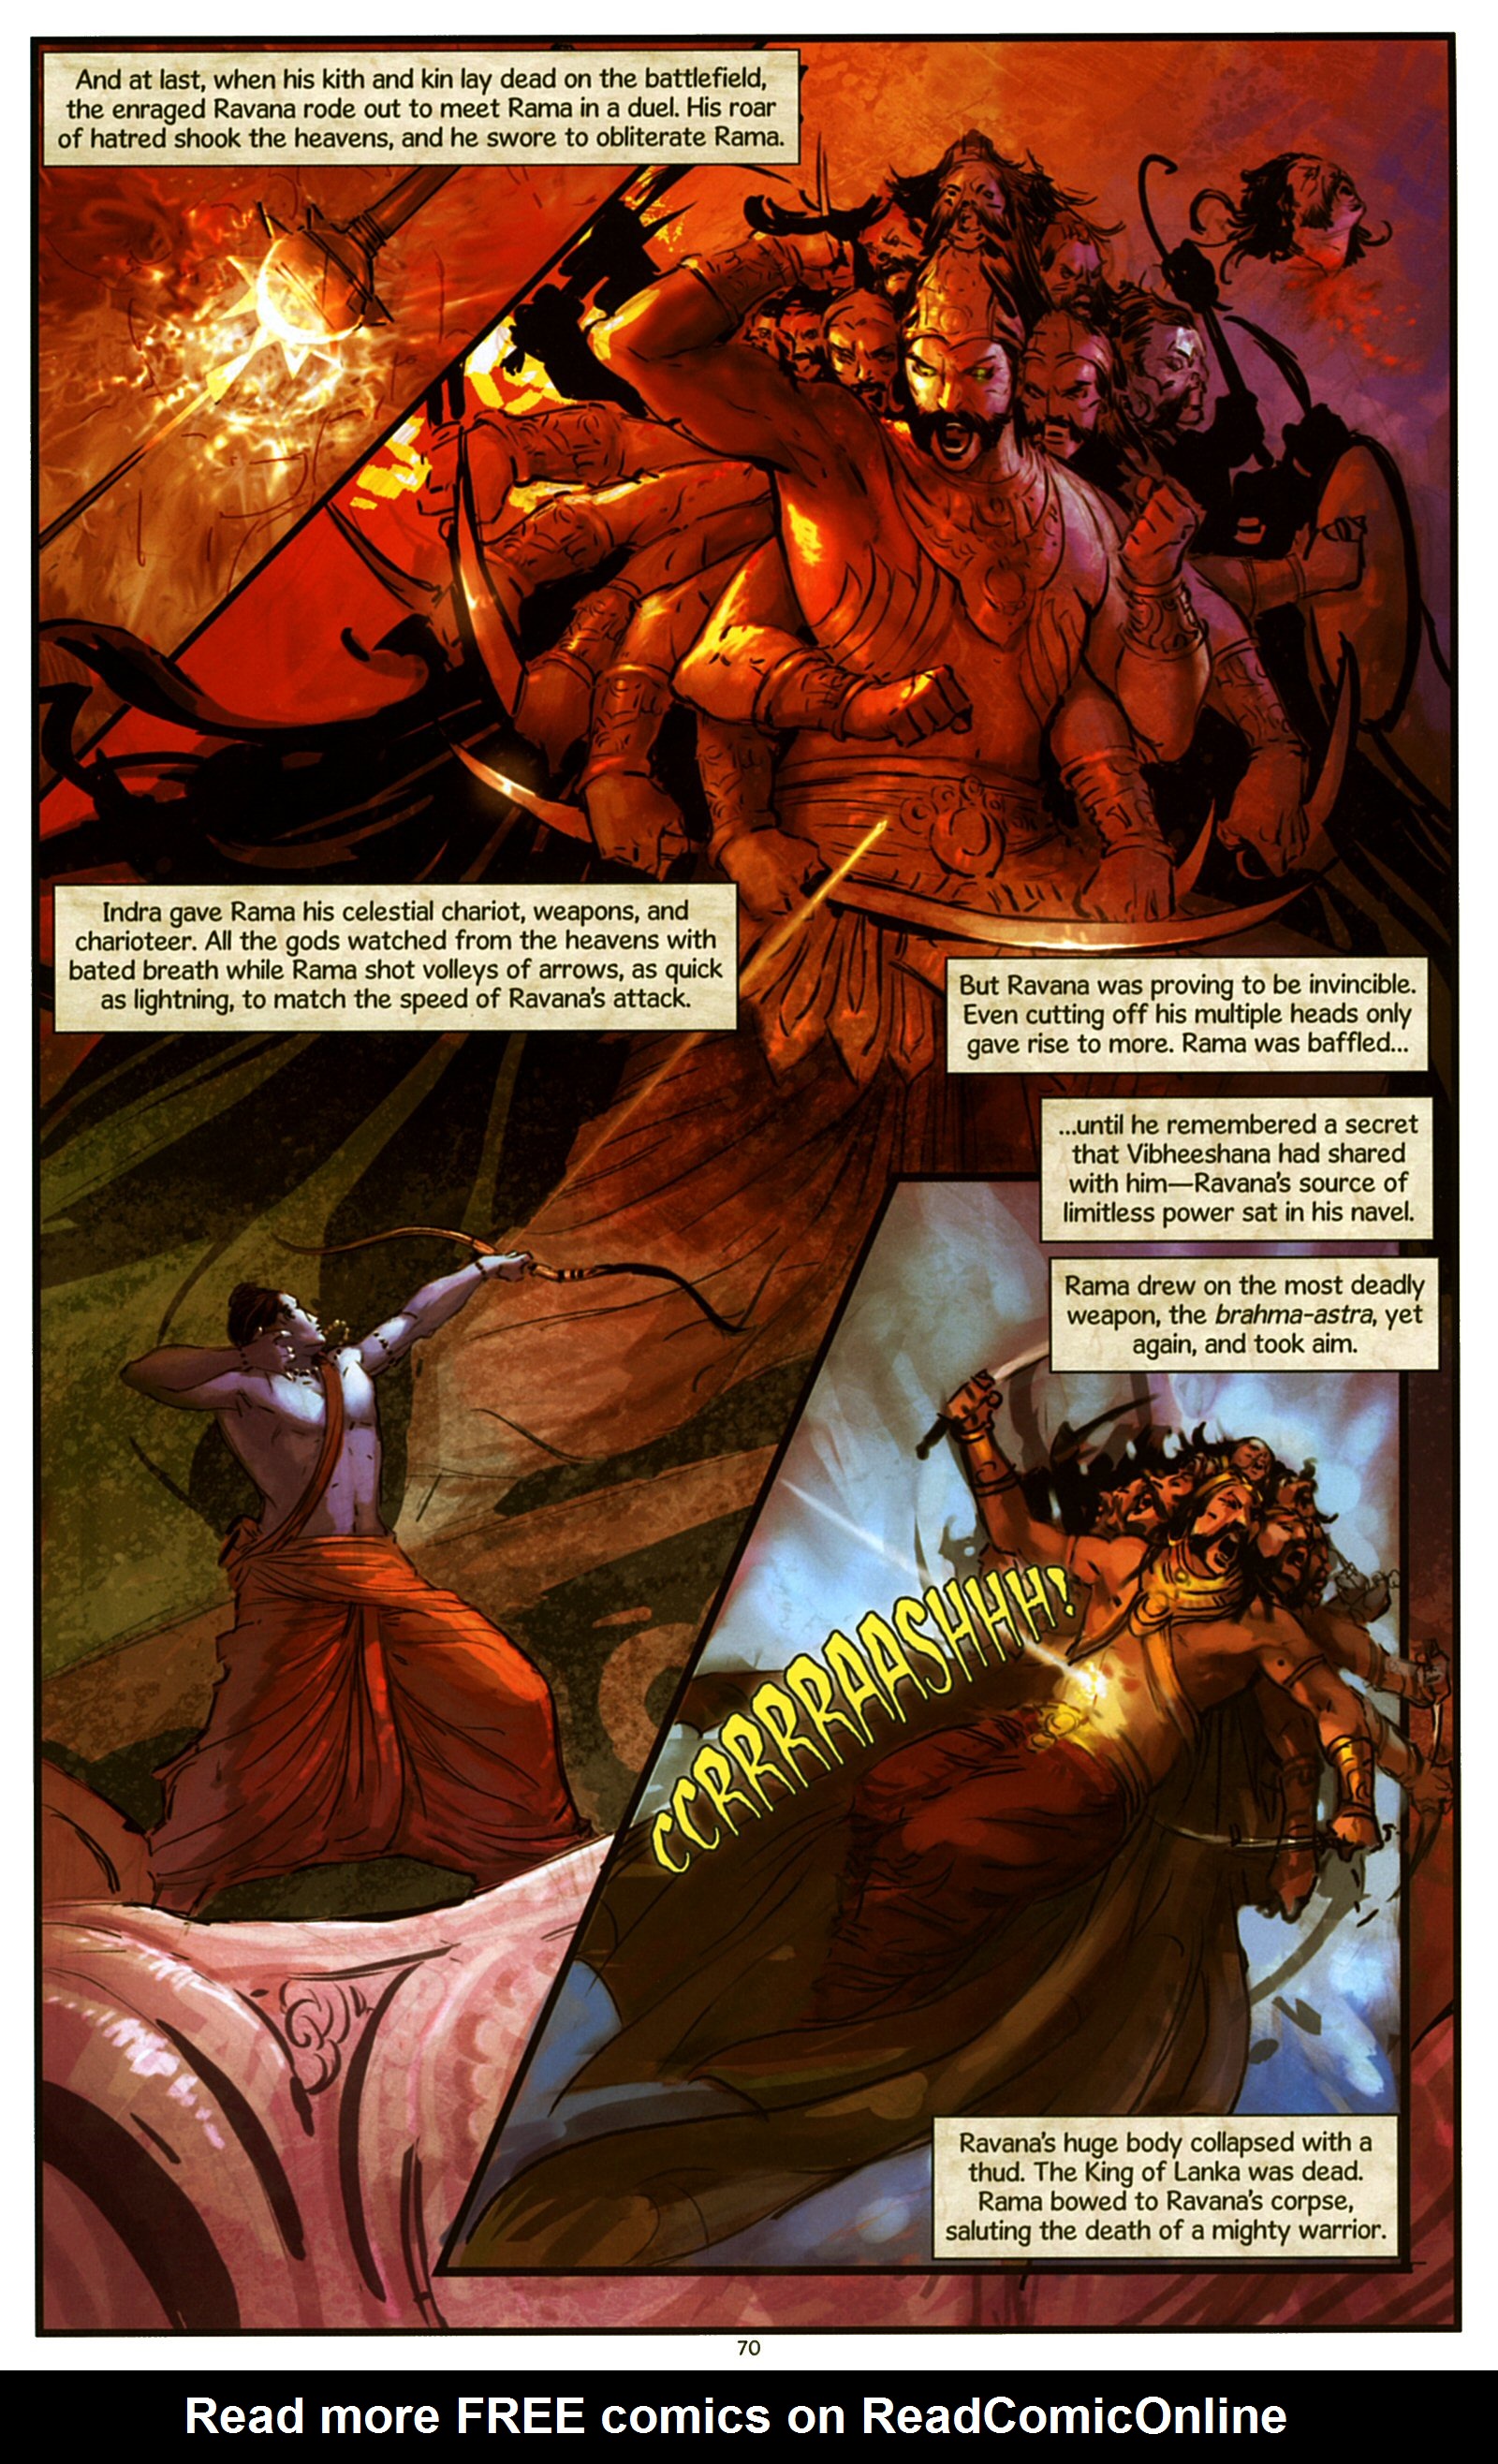 Read online Sita Daughter of the Earth comic -  Issue # TPB - 74